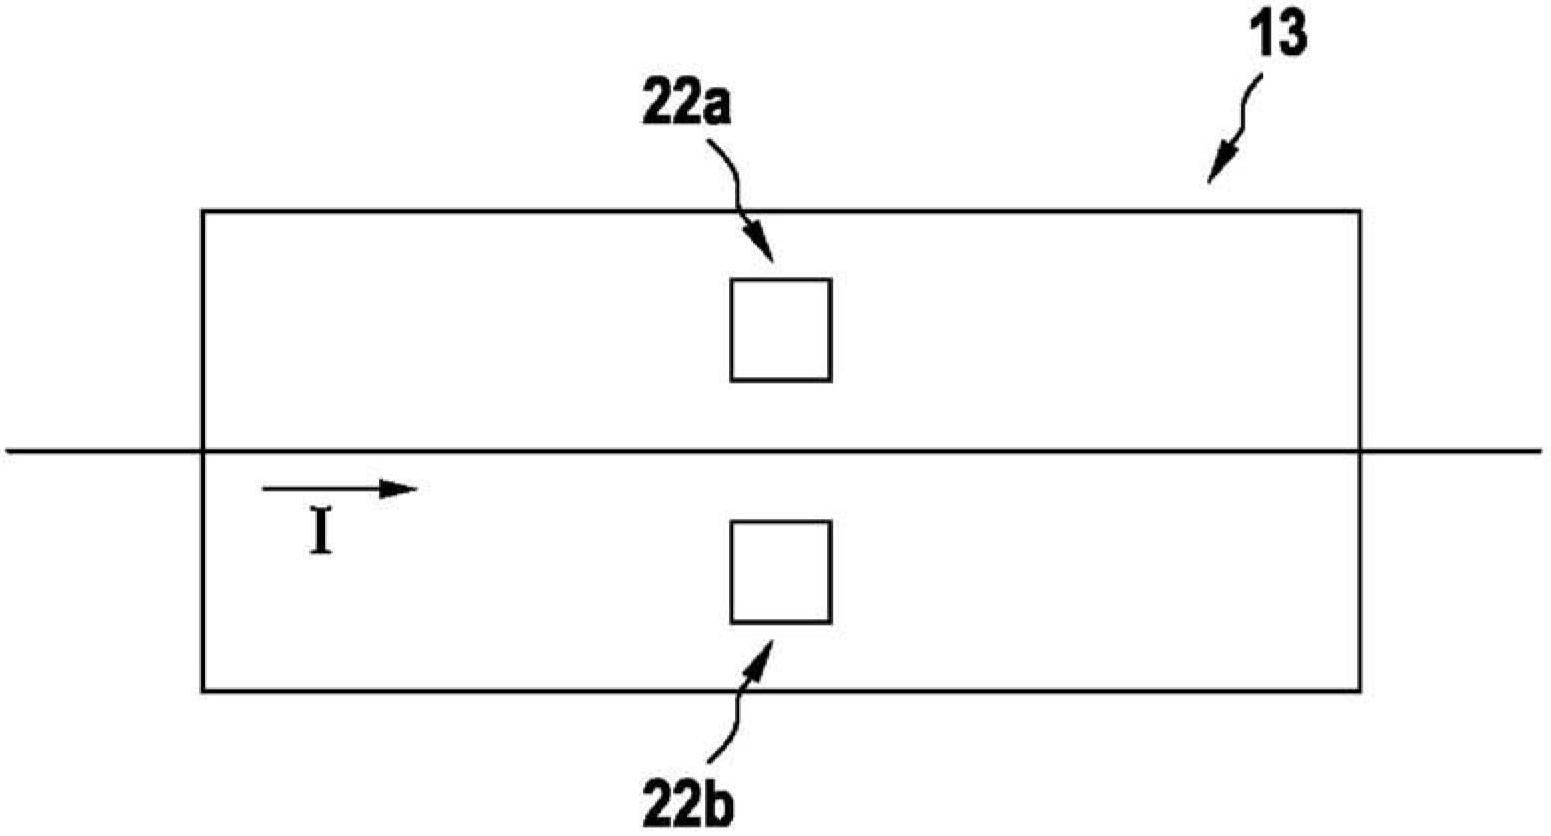 Component for limiting currents in electric circuits